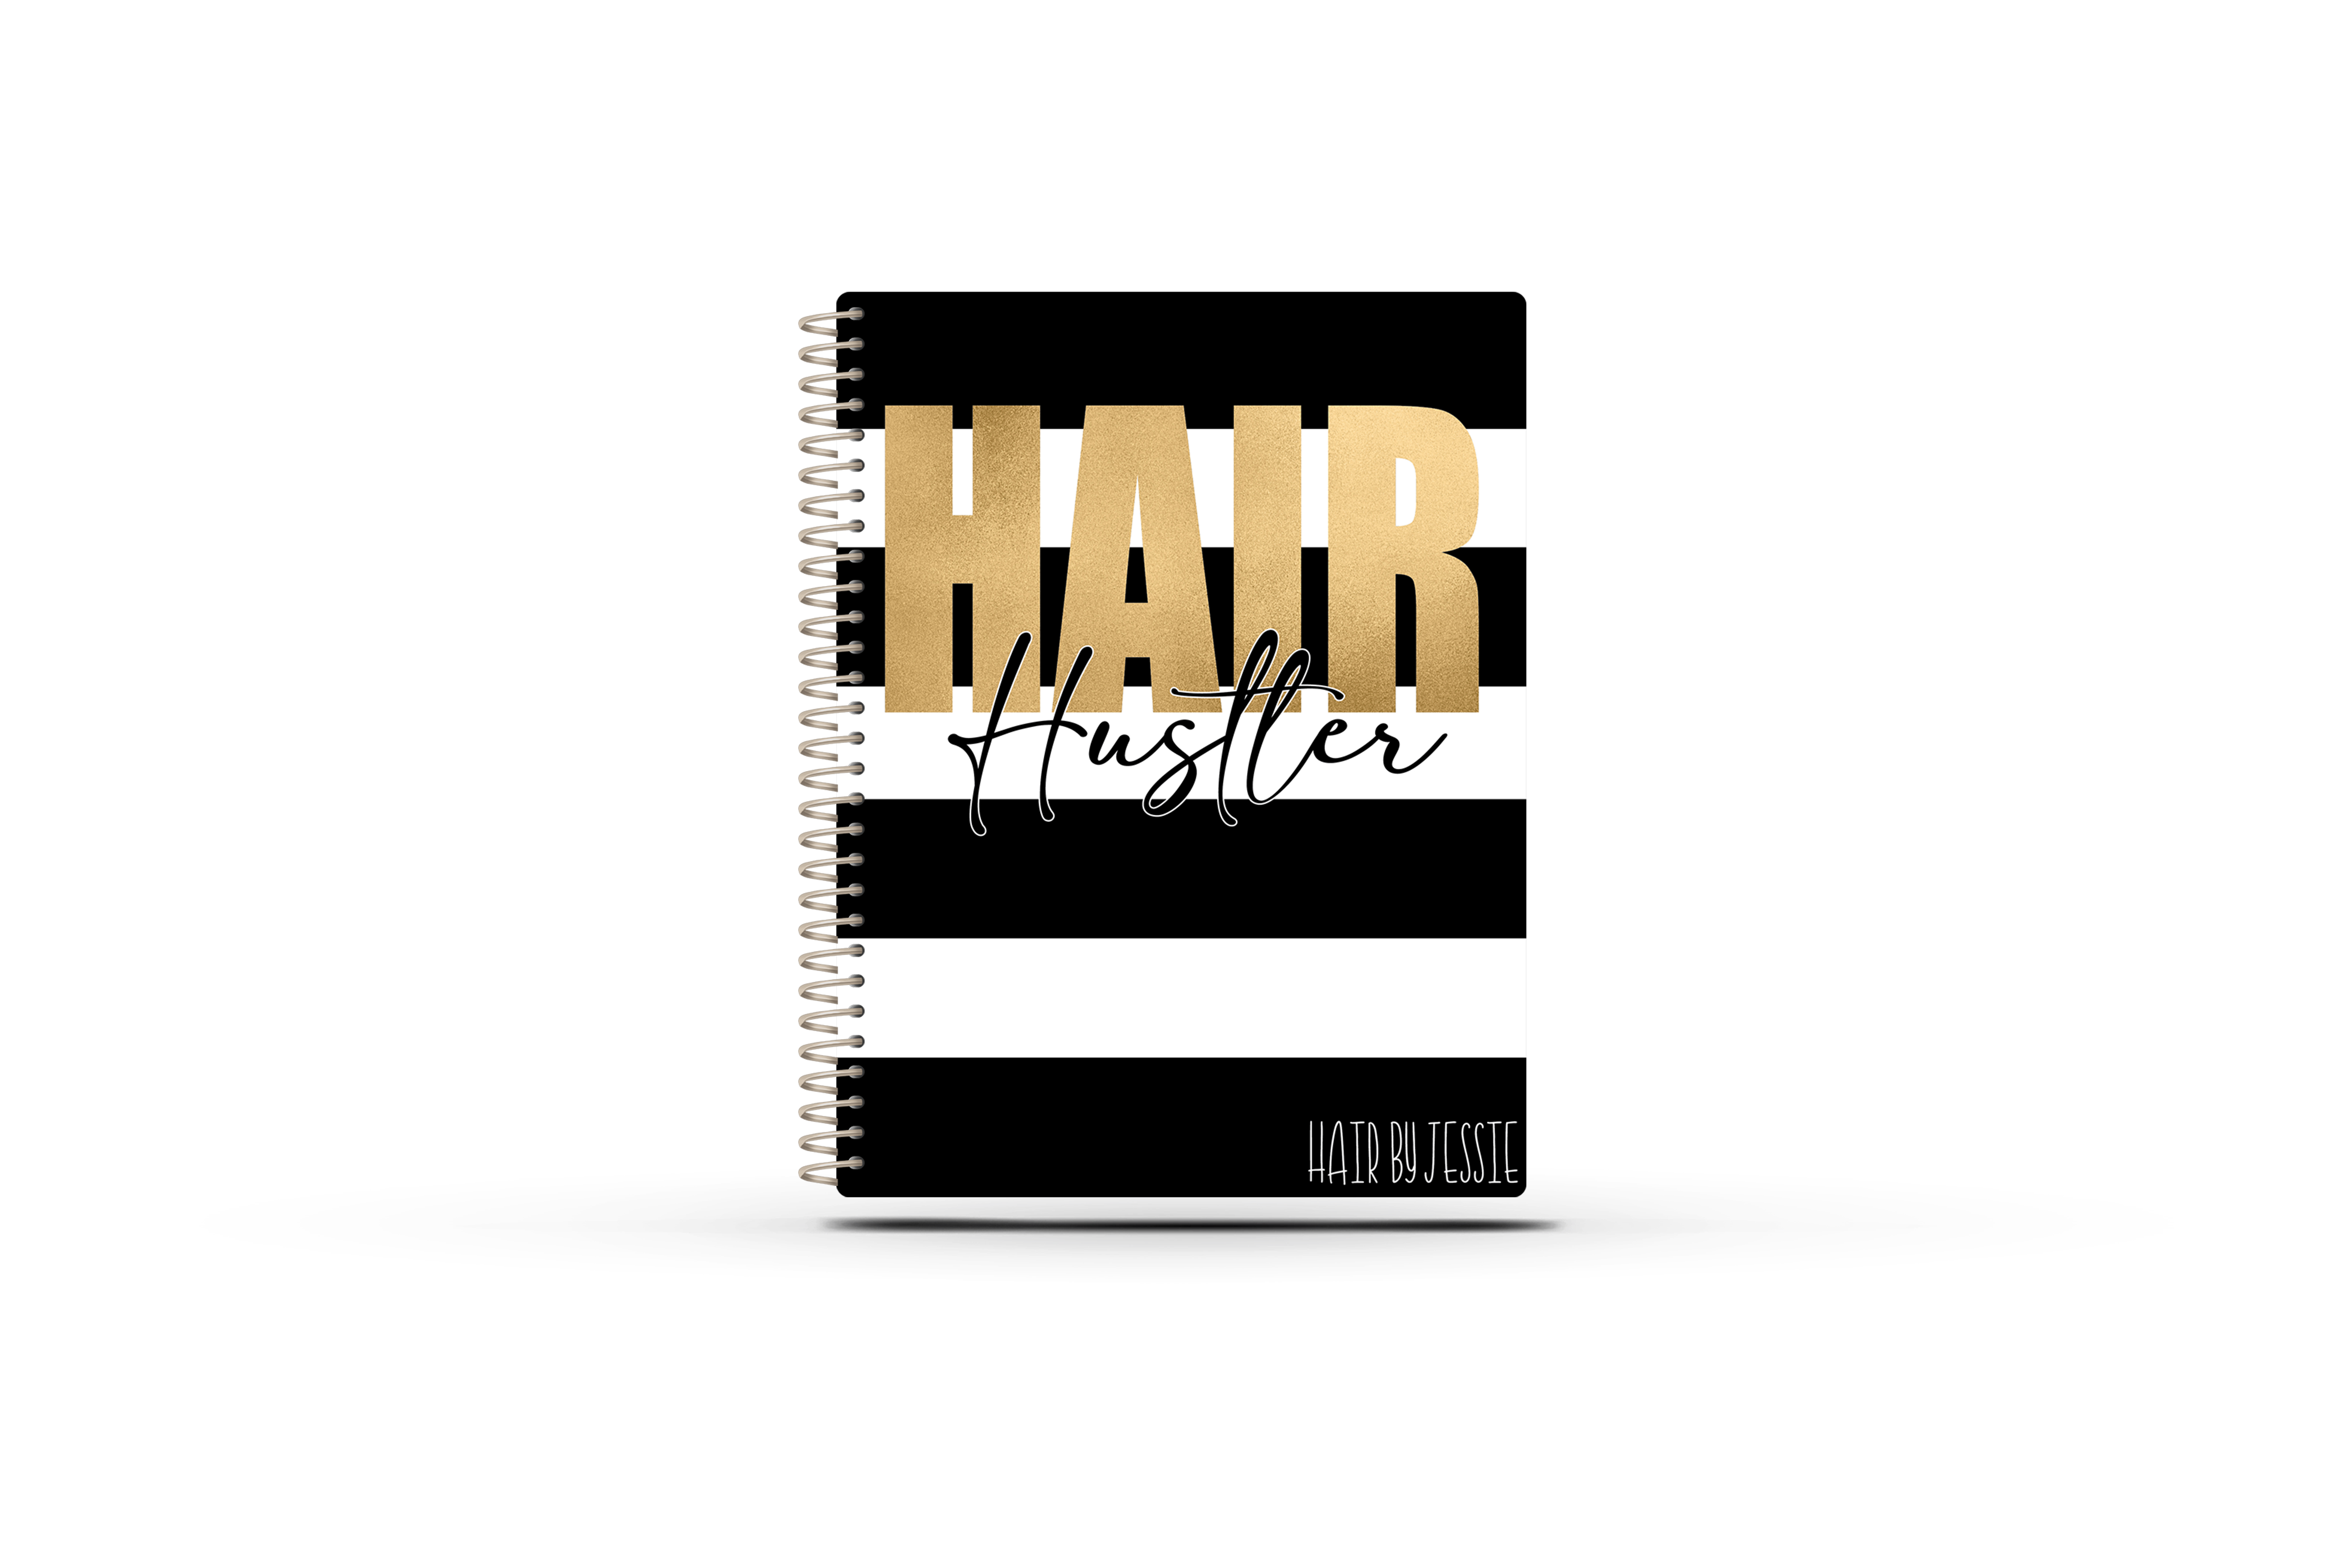 Sales Tracker Appointment Book -  BW STRIPPED GOLD HAIR HUSTLER